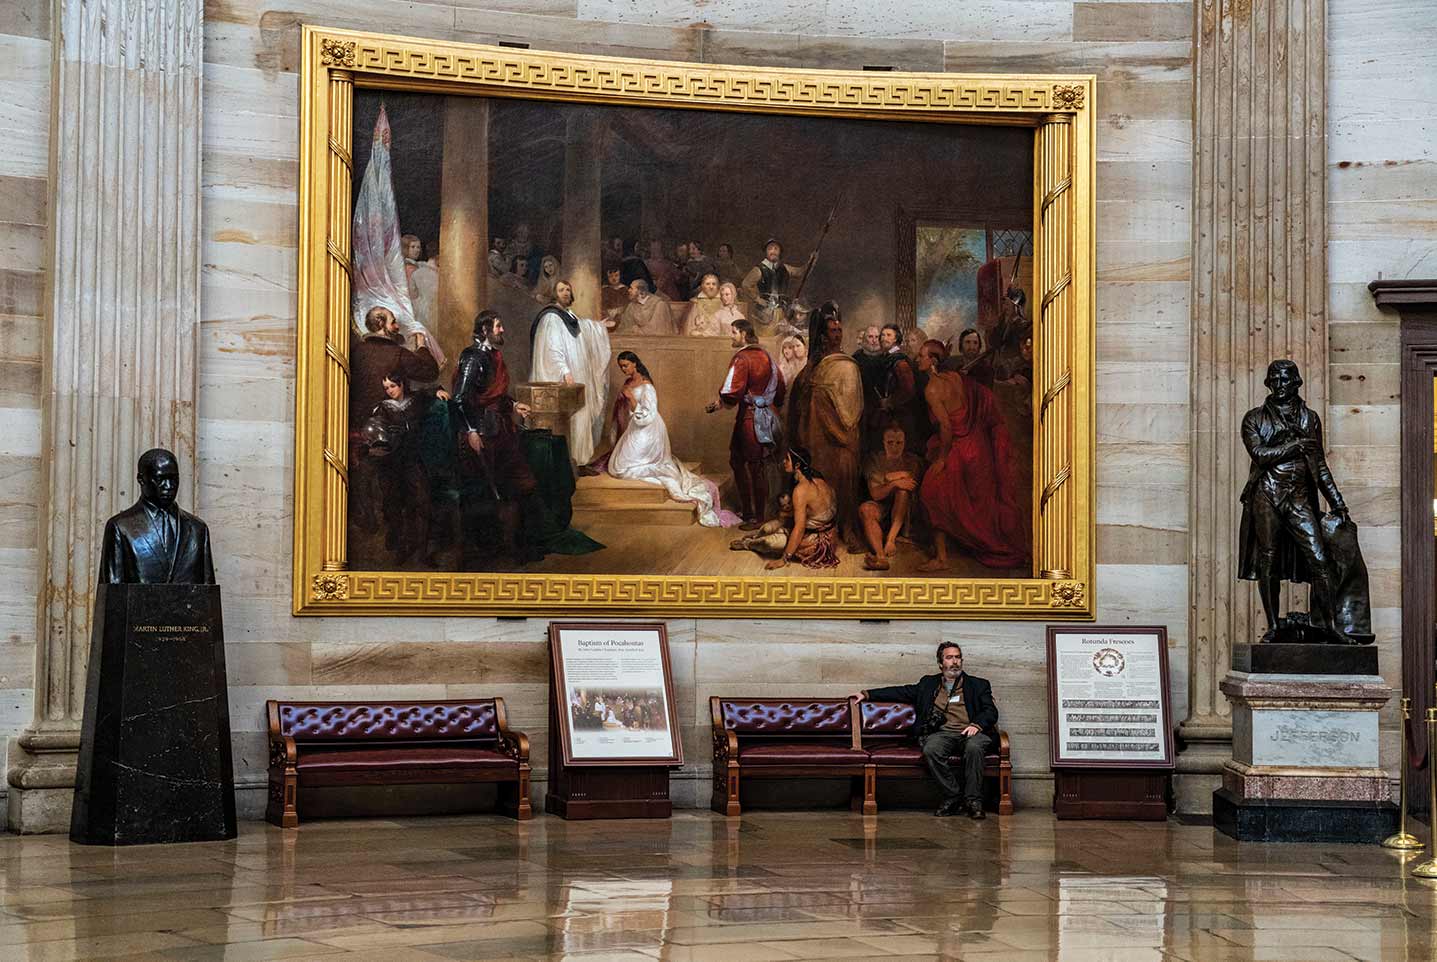 Andrew Lichtenstein ’88 in the US Capitol Rotunda, seated beneath the painting Baptism of Pocahontas, between busts of Martin Luther King, Jr. and President Thomas Jefferson on the night of President Trump’s impeachment.